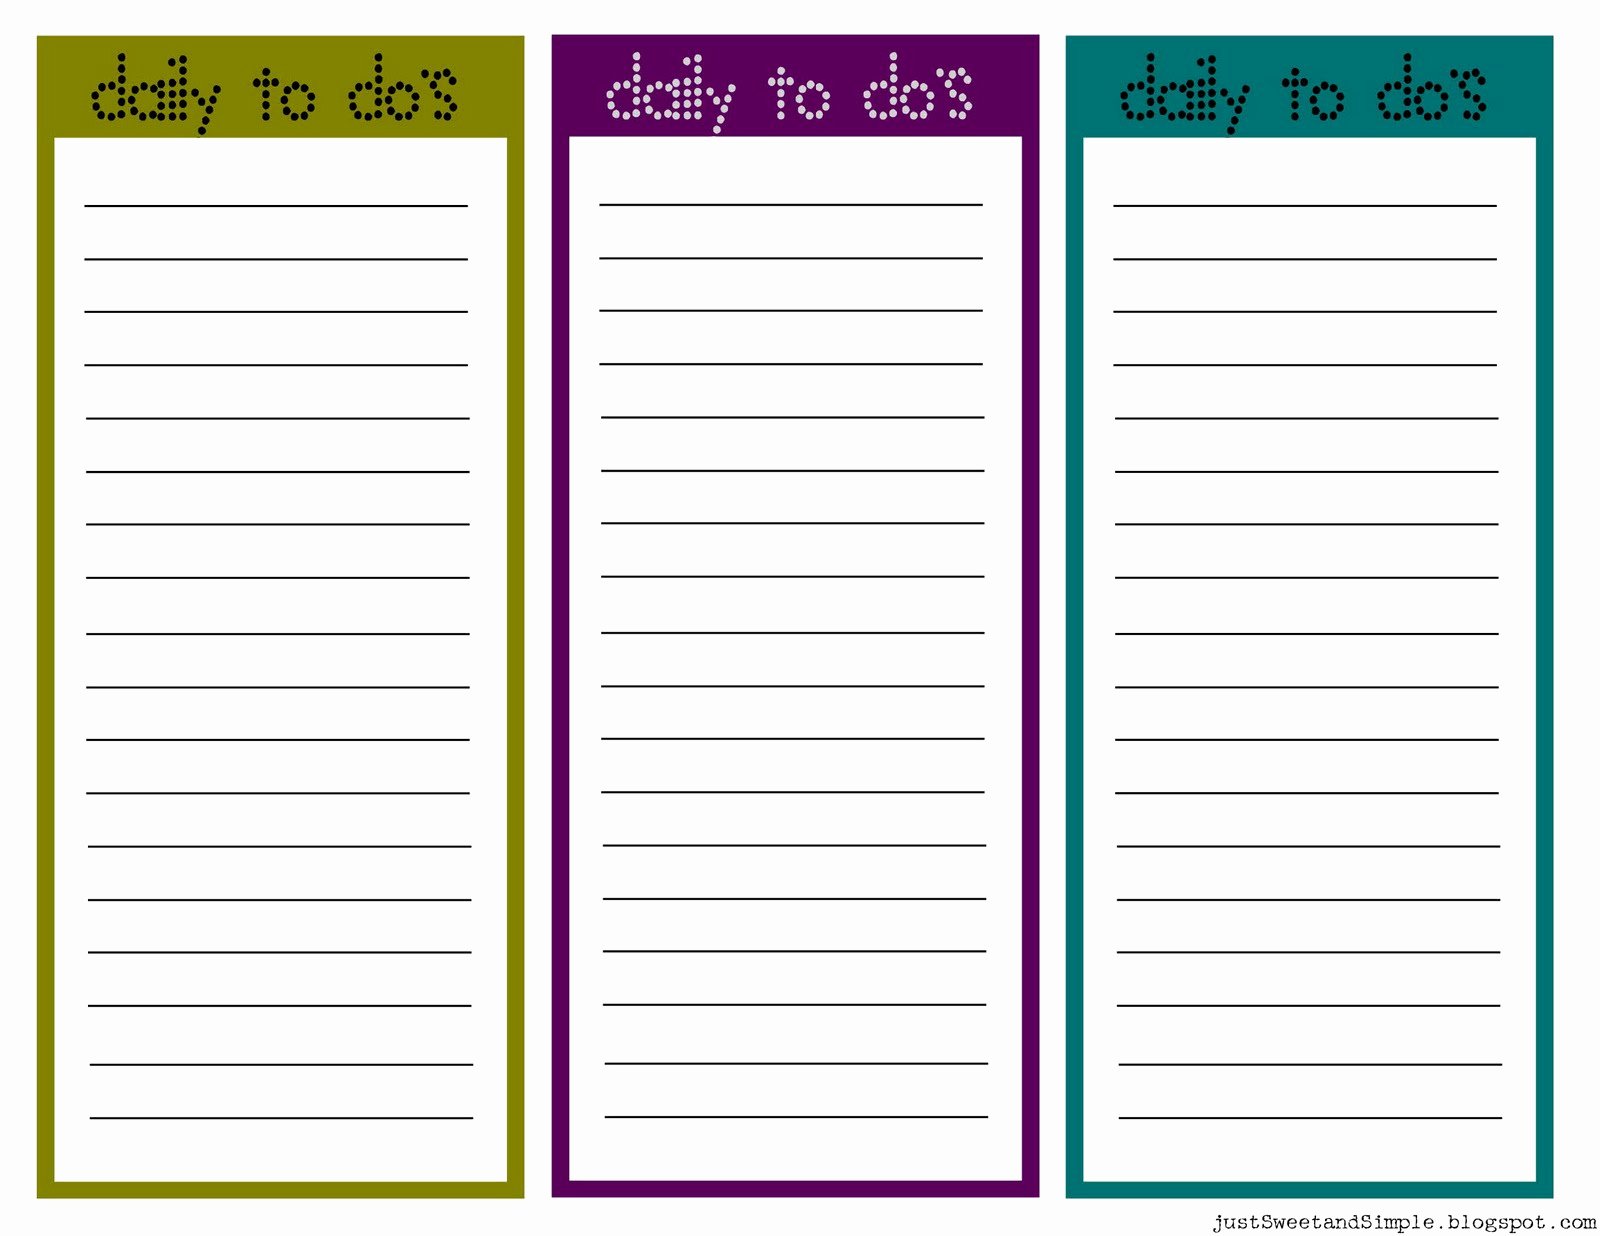 Just Sweet and Simple Printable Little Daily to Do List S